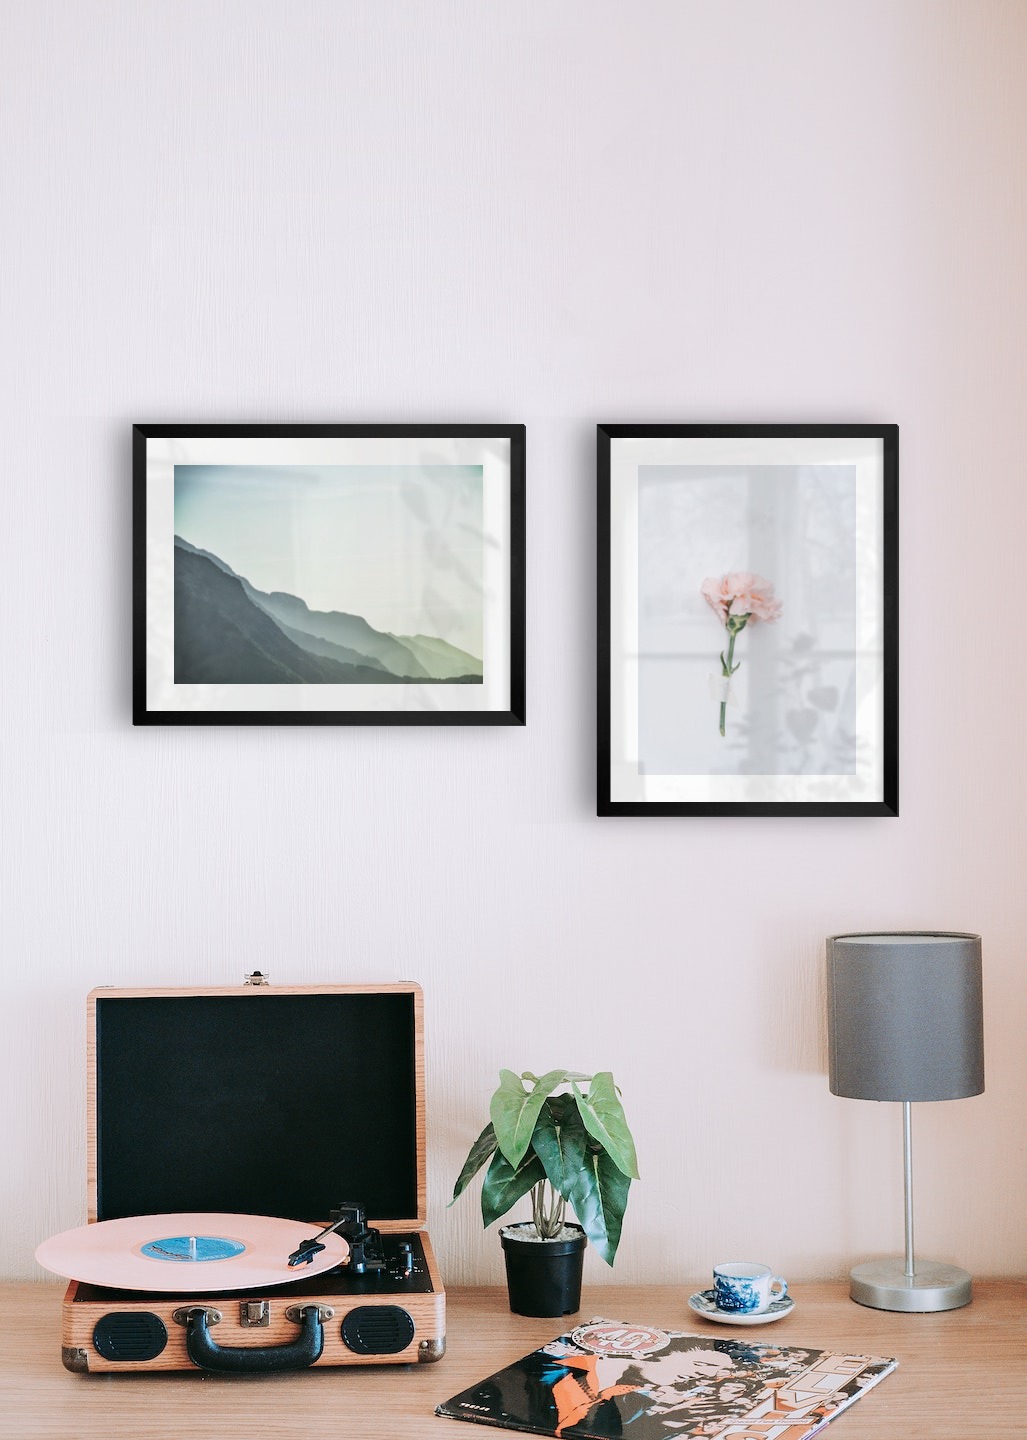 Gallery wall with picture frames in black in sizes 30x40 with prints "Foggy mountain" and "Pink flower"